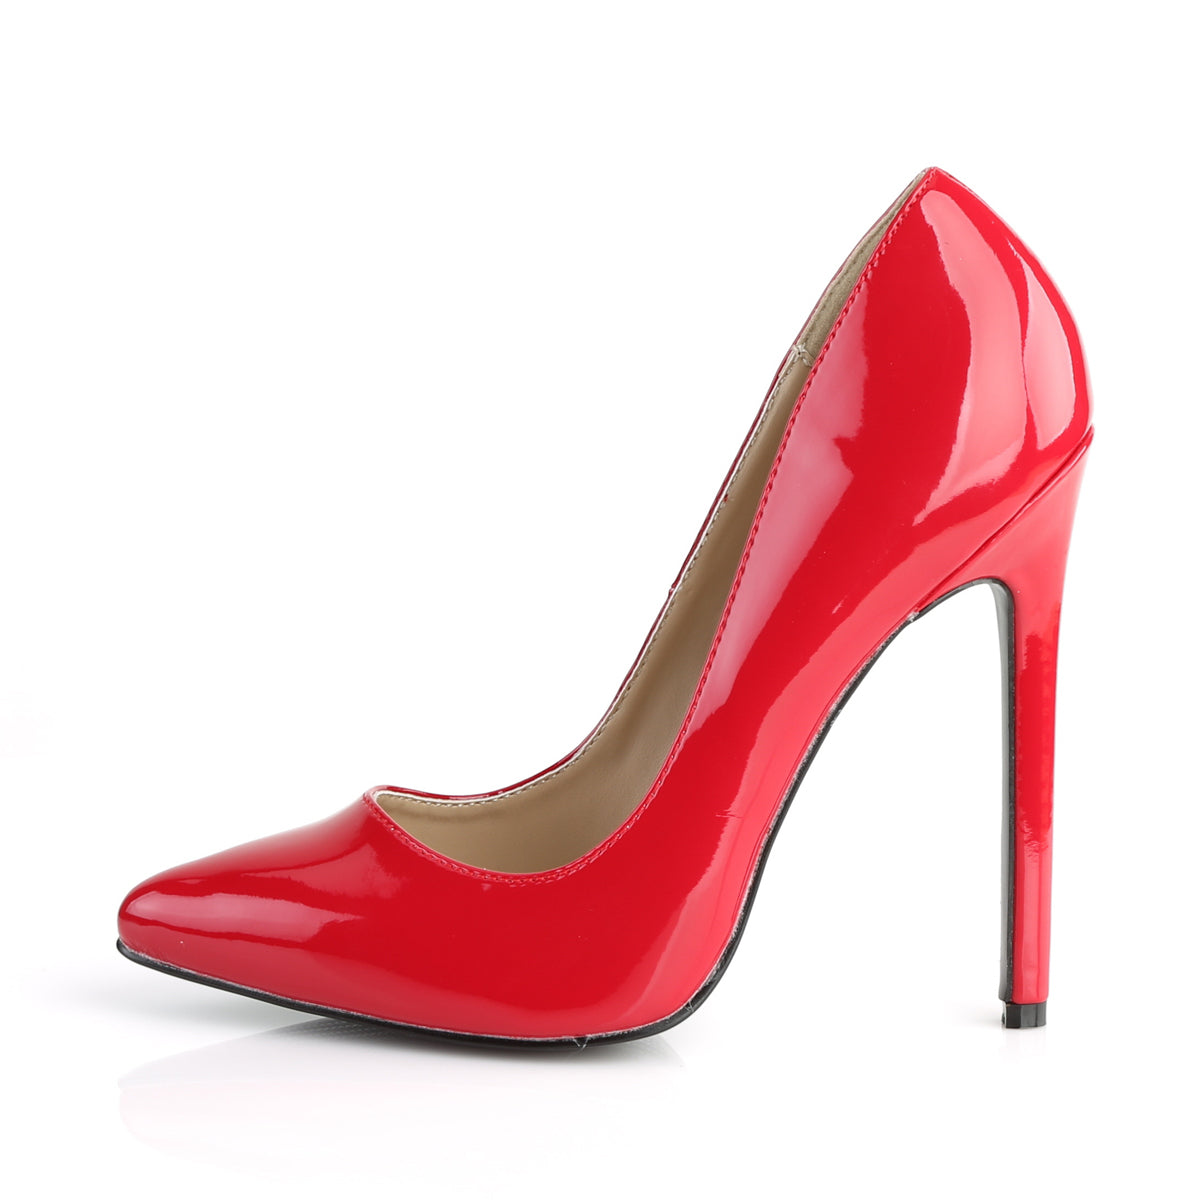 SEXY-20 Pleaser Shoes 5 Inch Heel Red Fetish Footwear-Pleaser- Sexy Shoes Pole Dance Heels